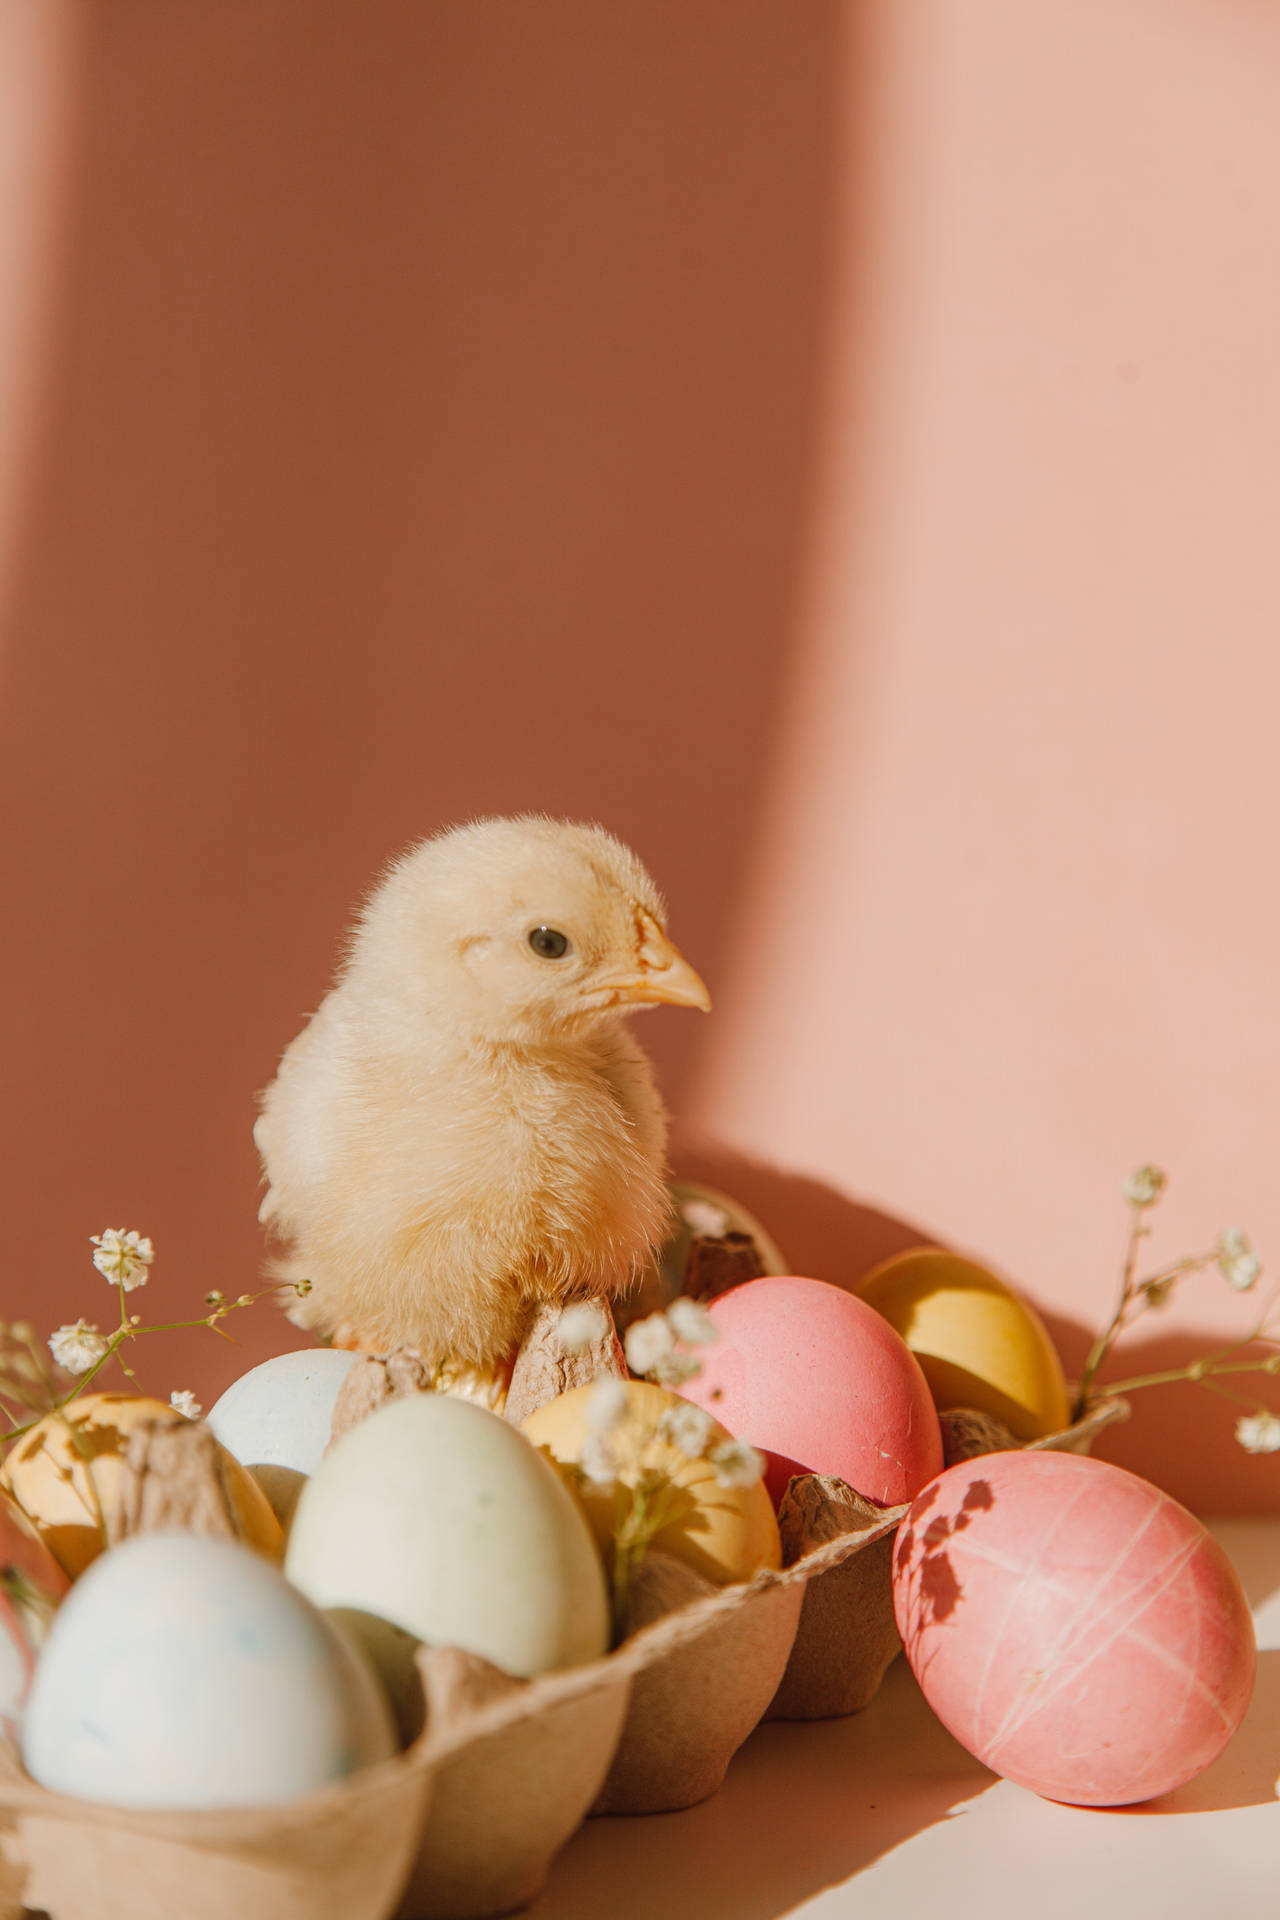 Cute Pastel Aesthetic Colored Eggs And Chick